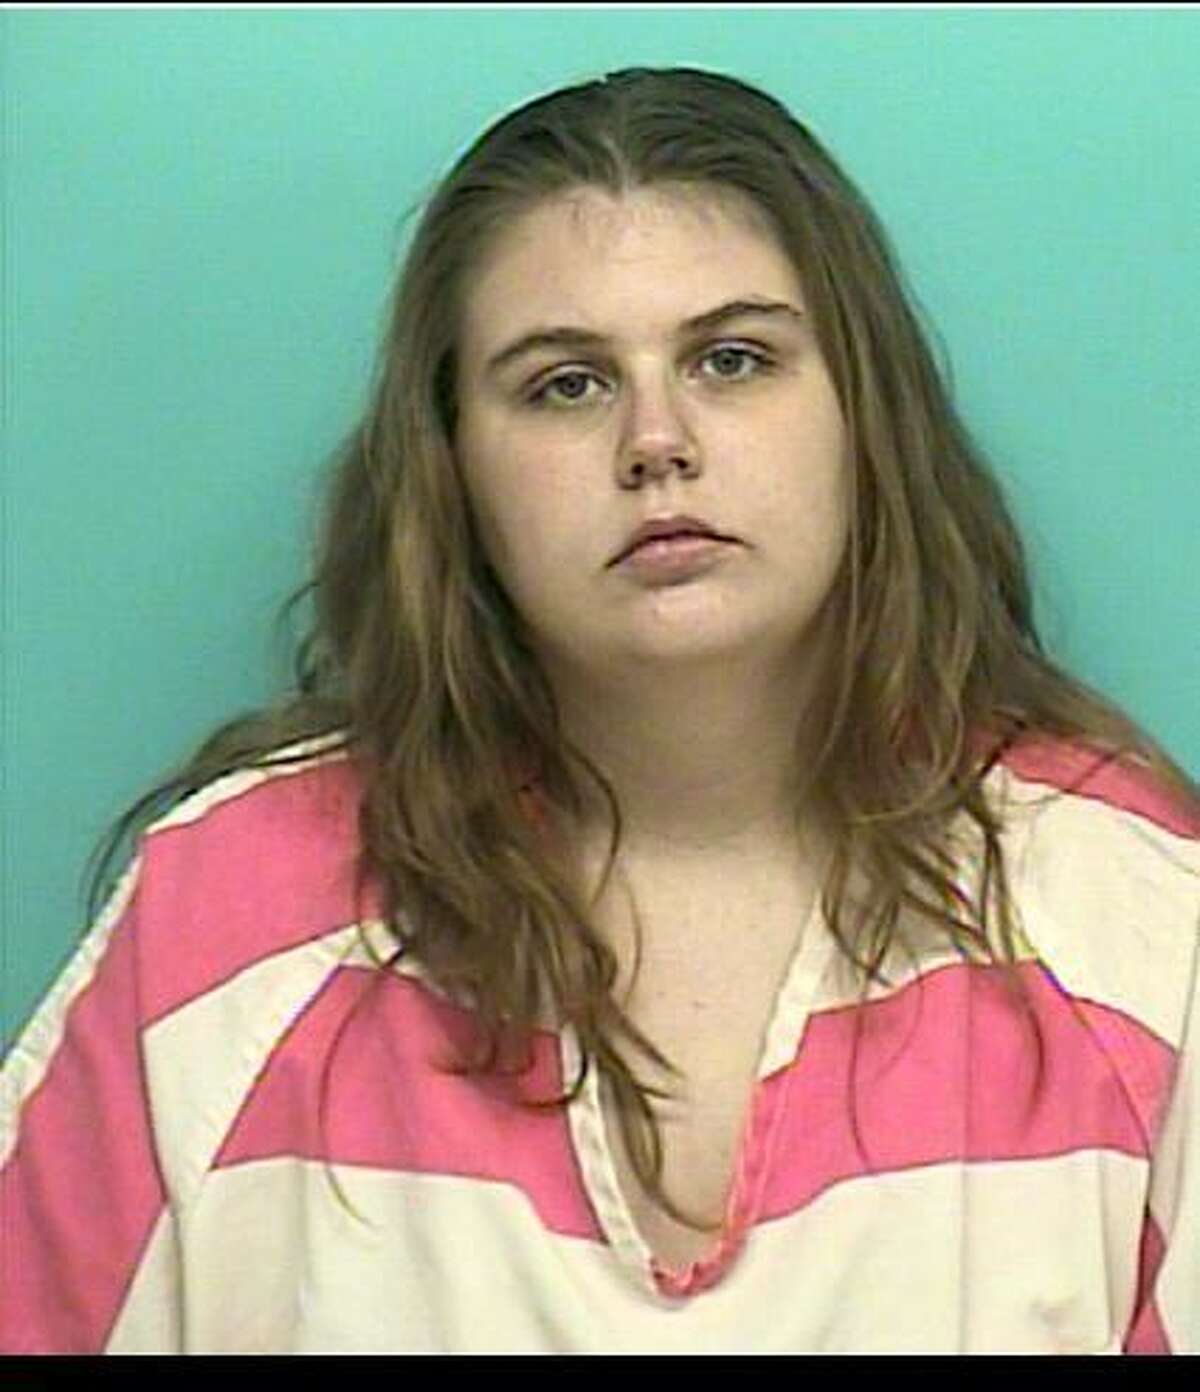 Charlene Ellet, 24, of Porter, is jailed on $50,000 bond, accused of assaulting a family member. Photo: Montgomery County Sheriff's Office